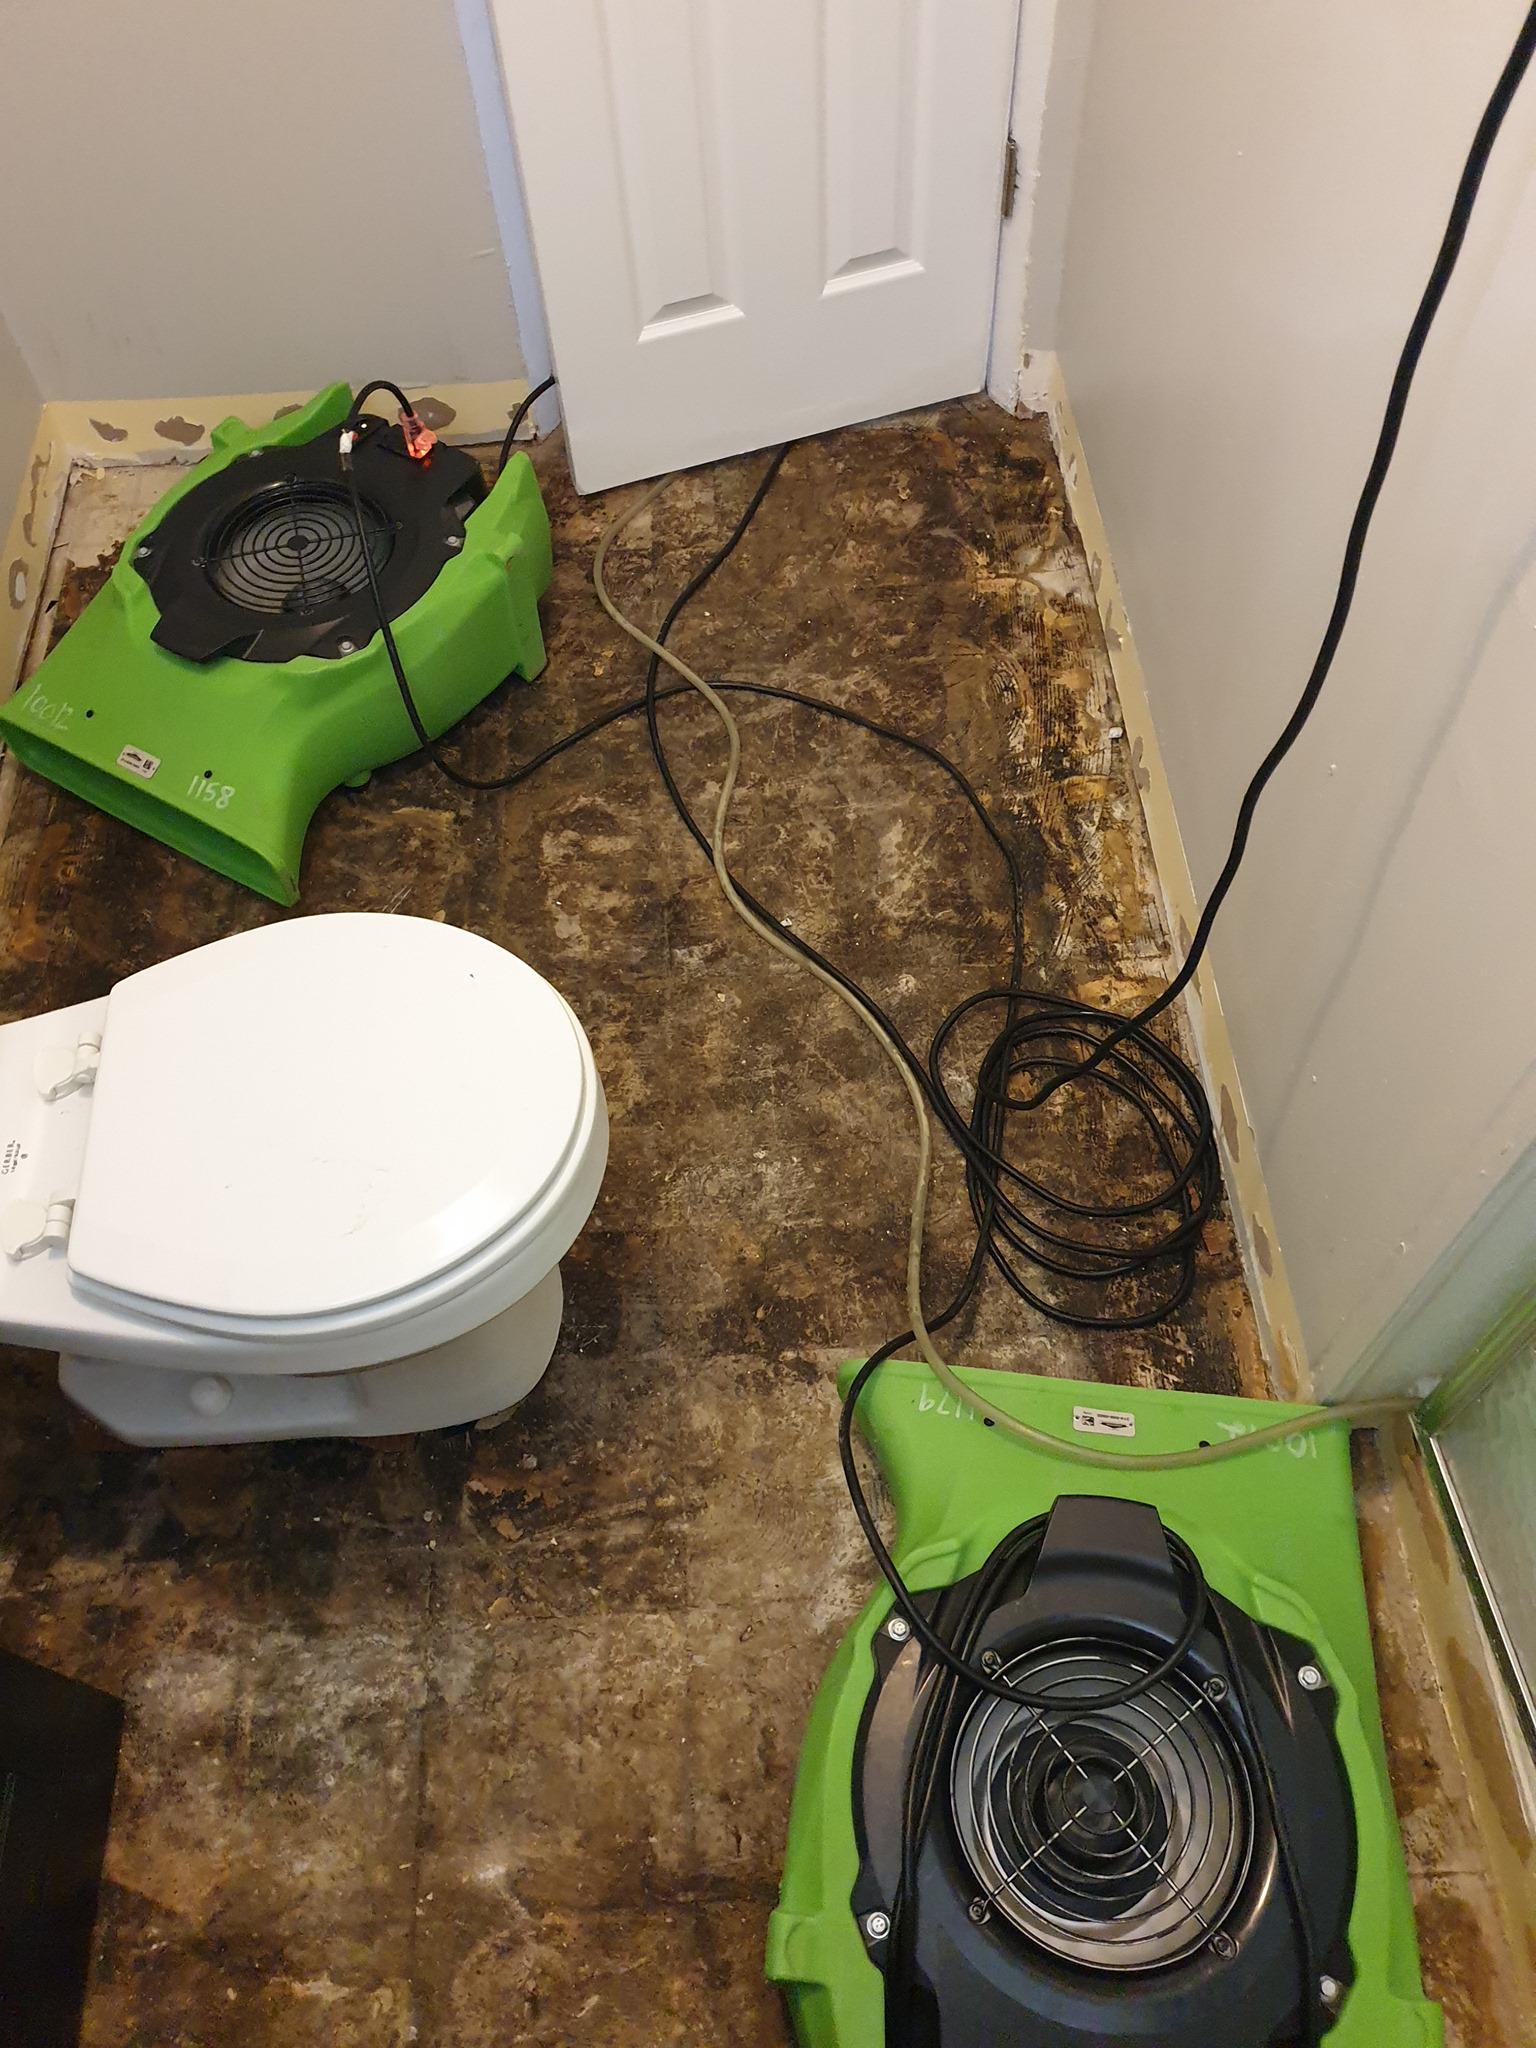 We understand that you want your living space back to normal ASAP. SERVPRO of Oakville/Mehlville prides itself on being fast and efficient.